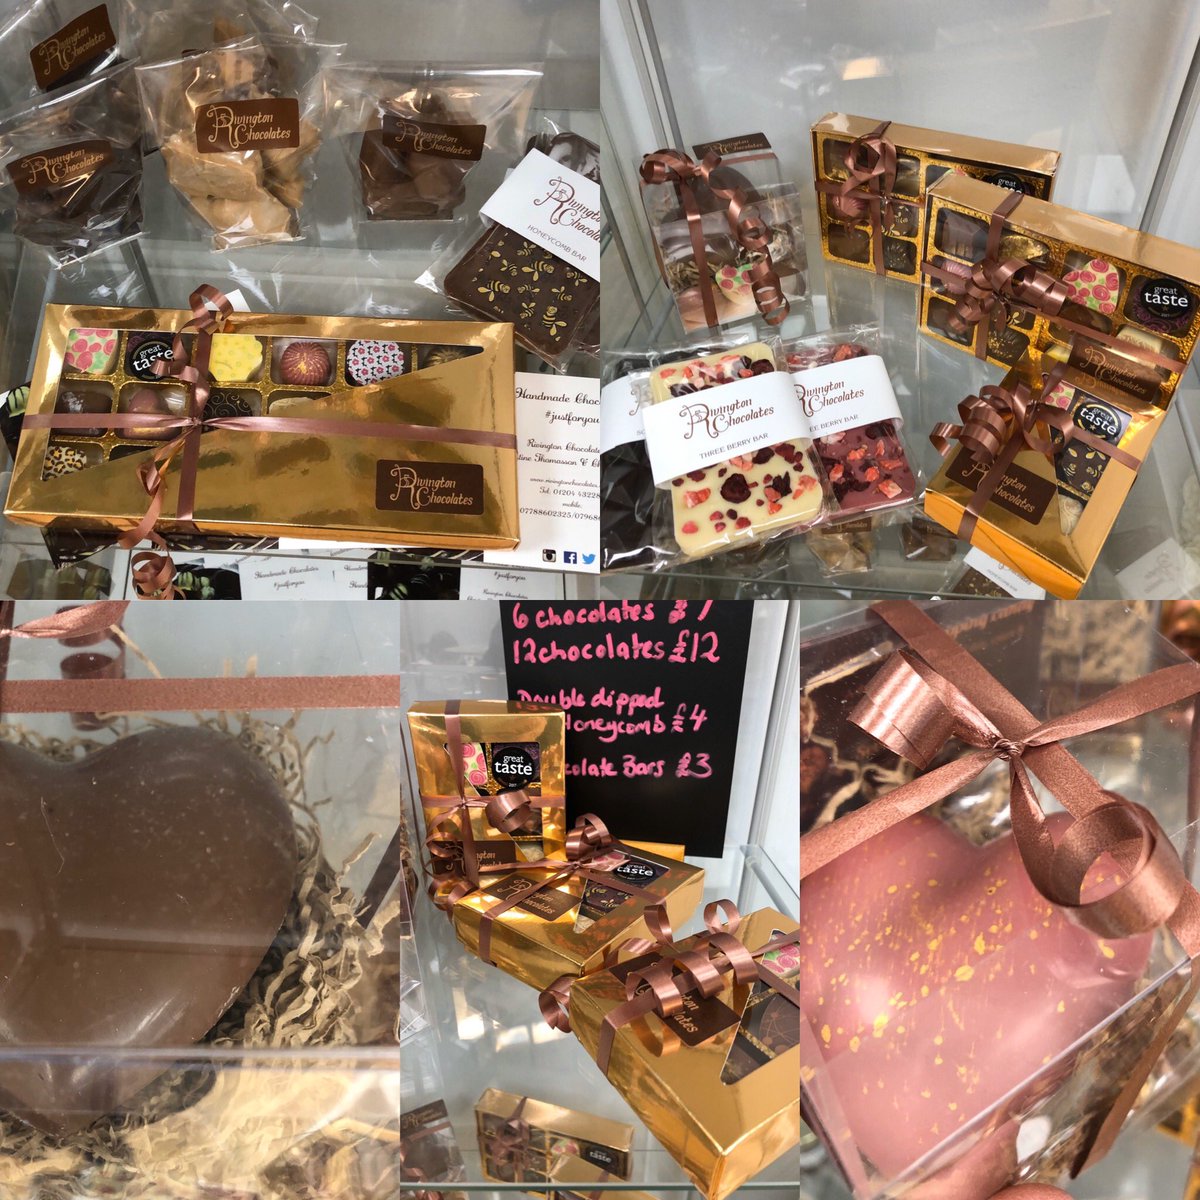 If you have not had chance to buy a Valentines gift - stocked up @JustGorjussCakes - 95, Lee Lane, Horwich - #chocolatehearts #boxedchocolates 😄❤️🍫